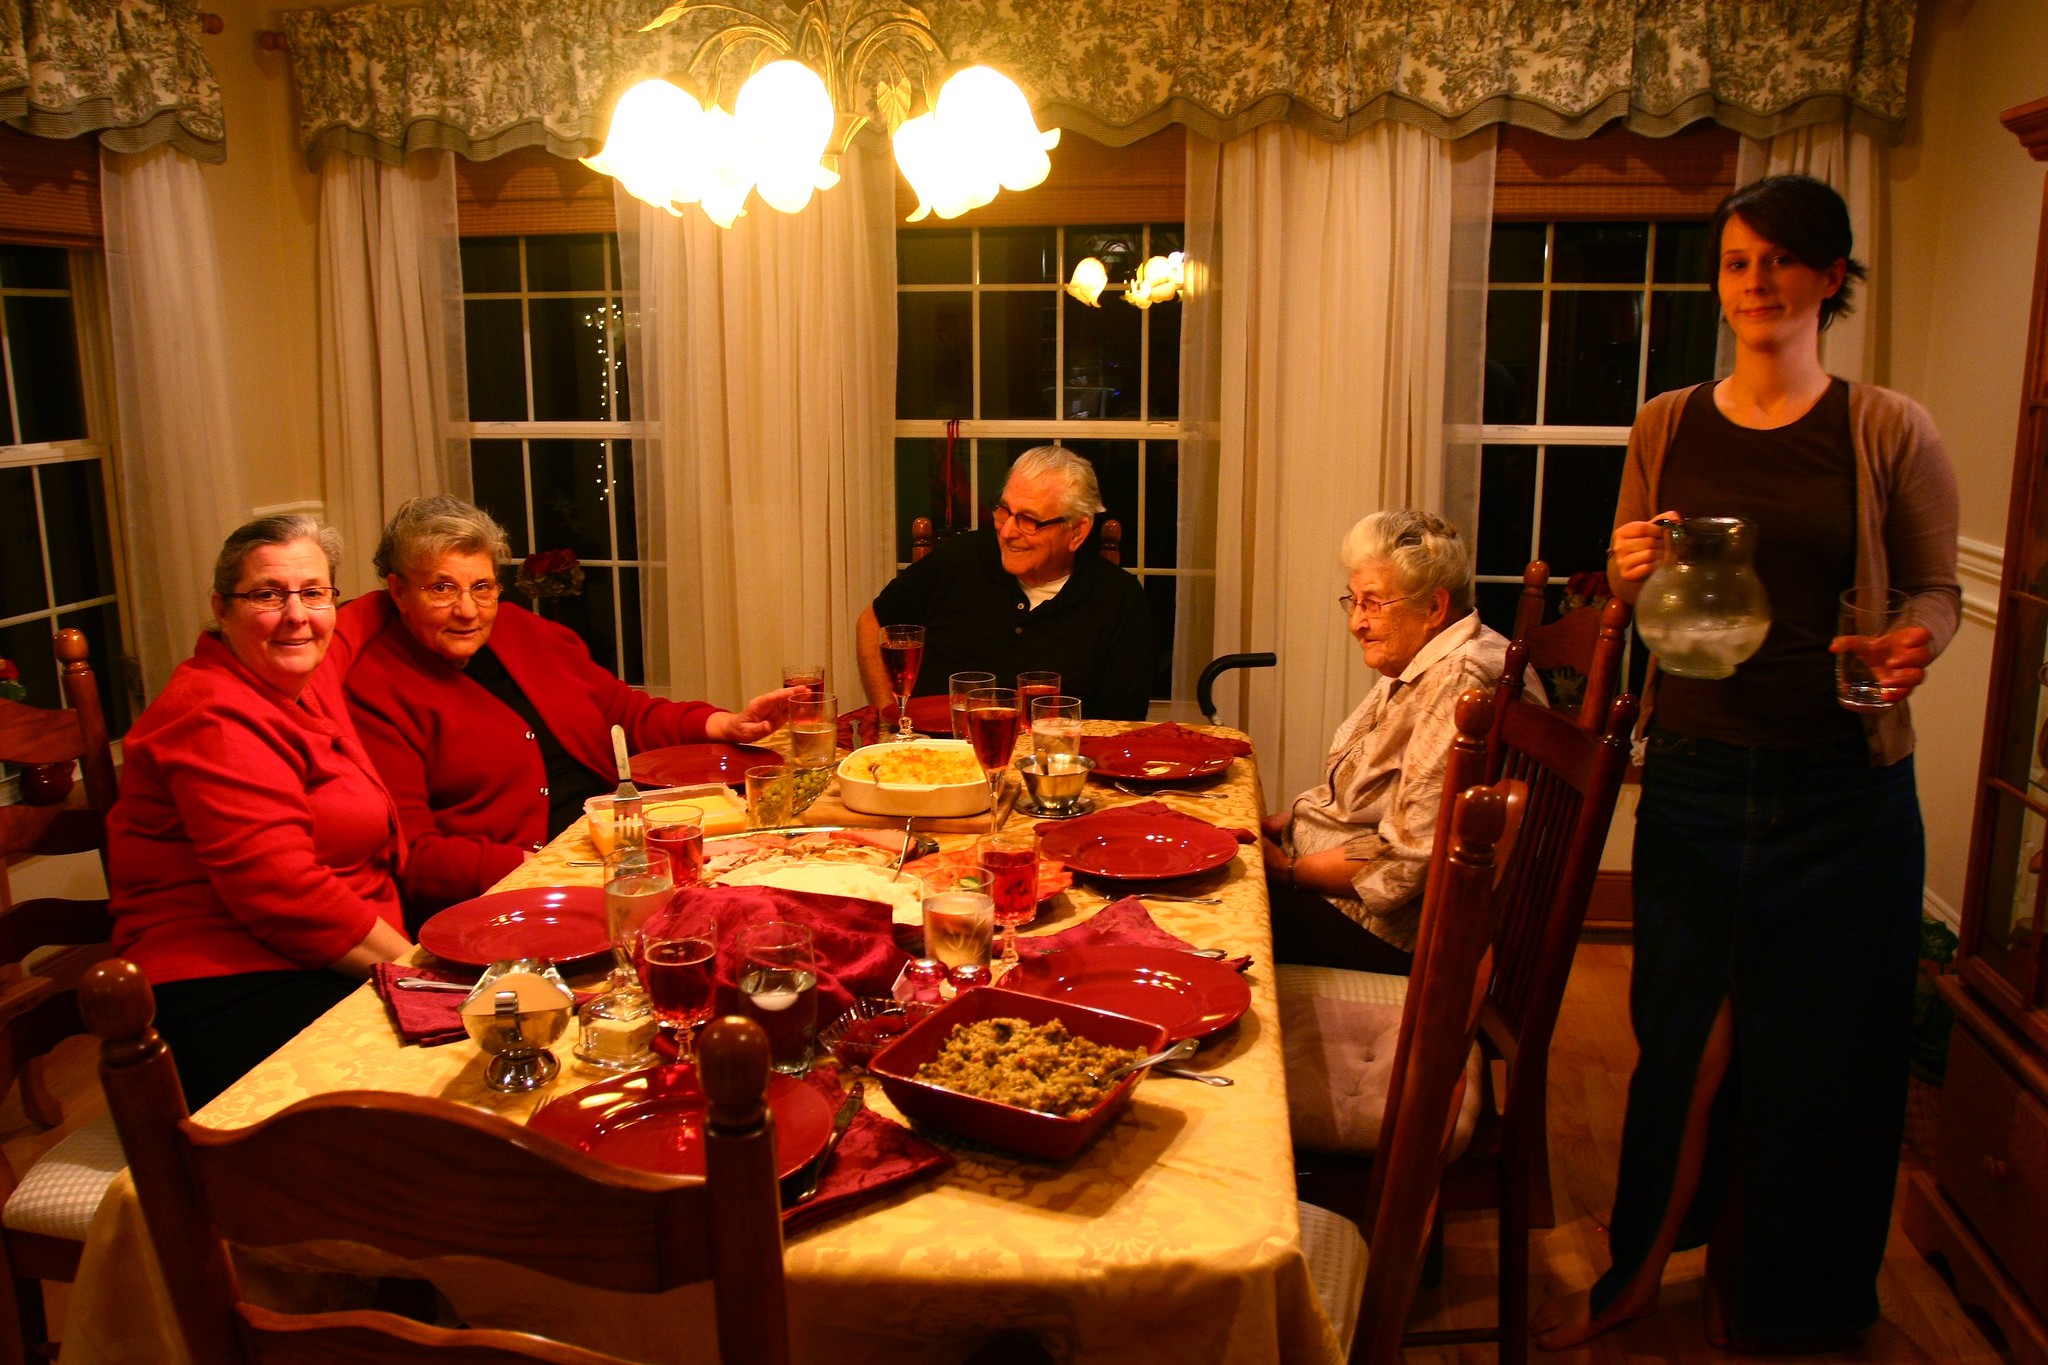 A woman server standing close to a family gathered for Christmas dinner | Source: Flickr